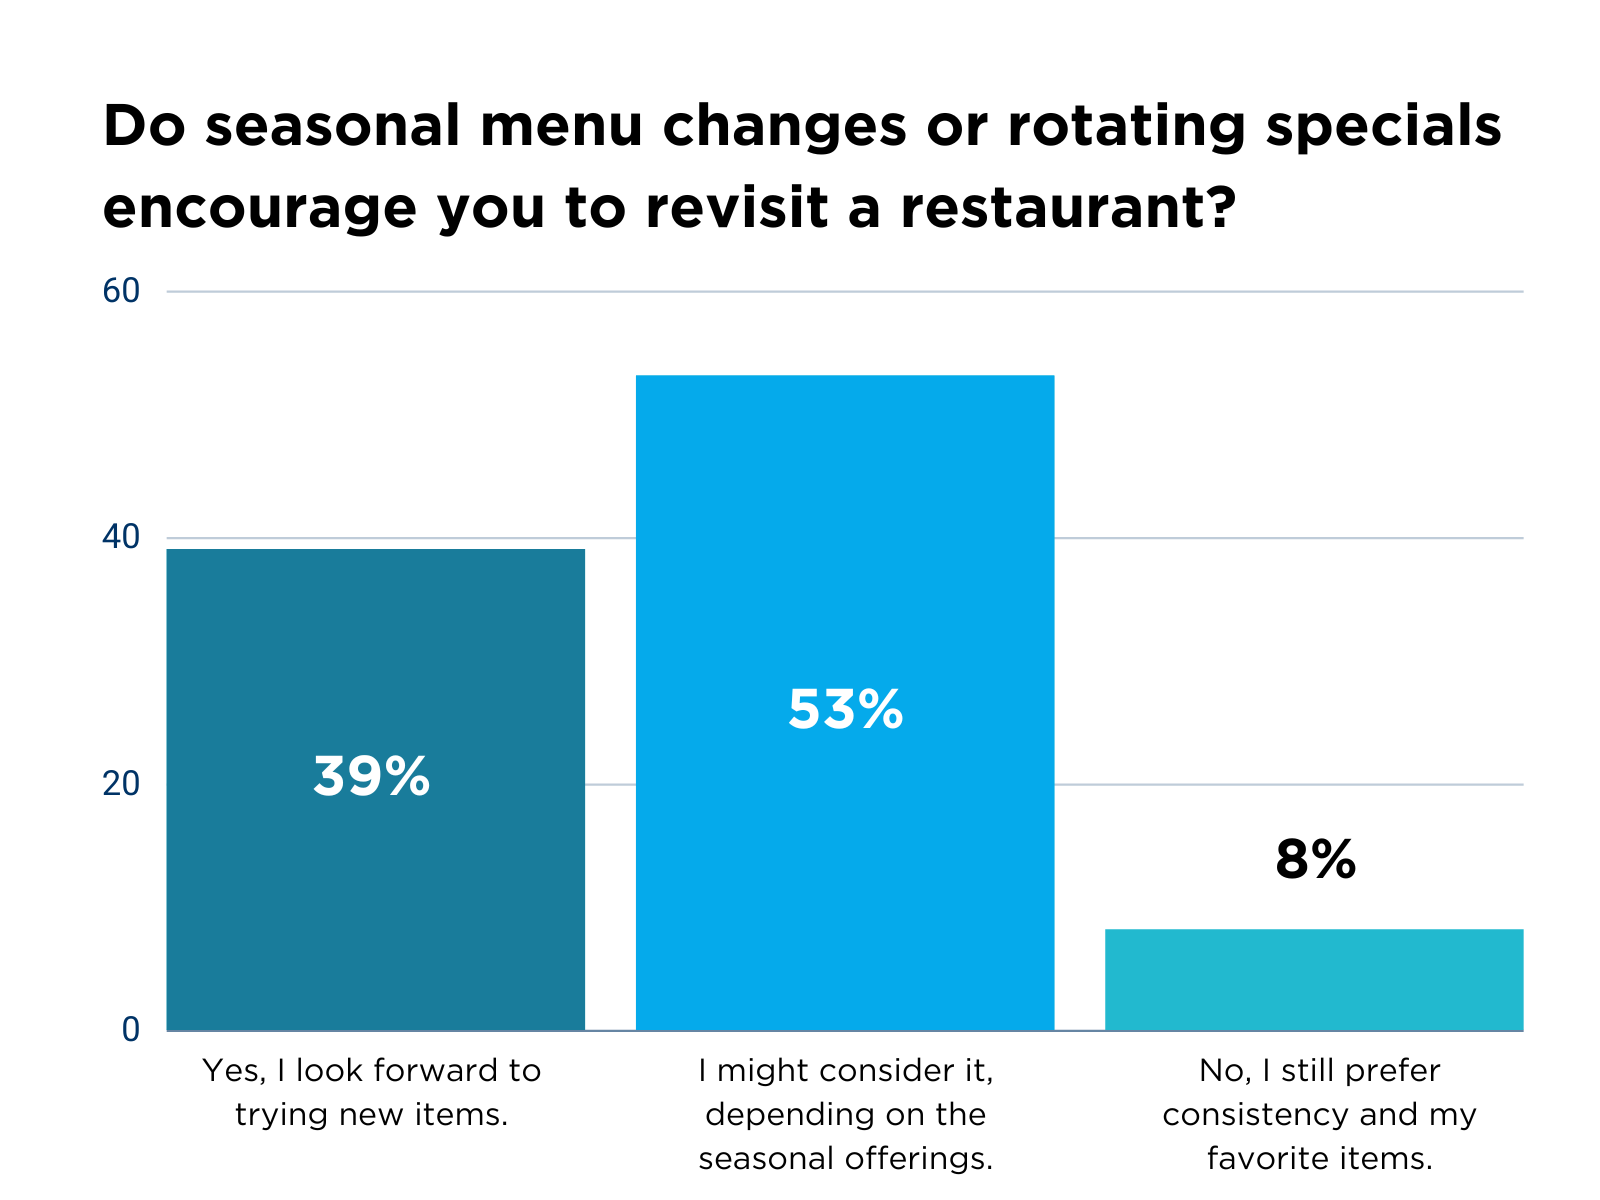 Graph showing 39% of people look forward to trying new items, 53% might consider it depending on seasonal offerings, and 8% still prefer consistency when asked if seasonal menu changes encourage revisiting a restaurant.